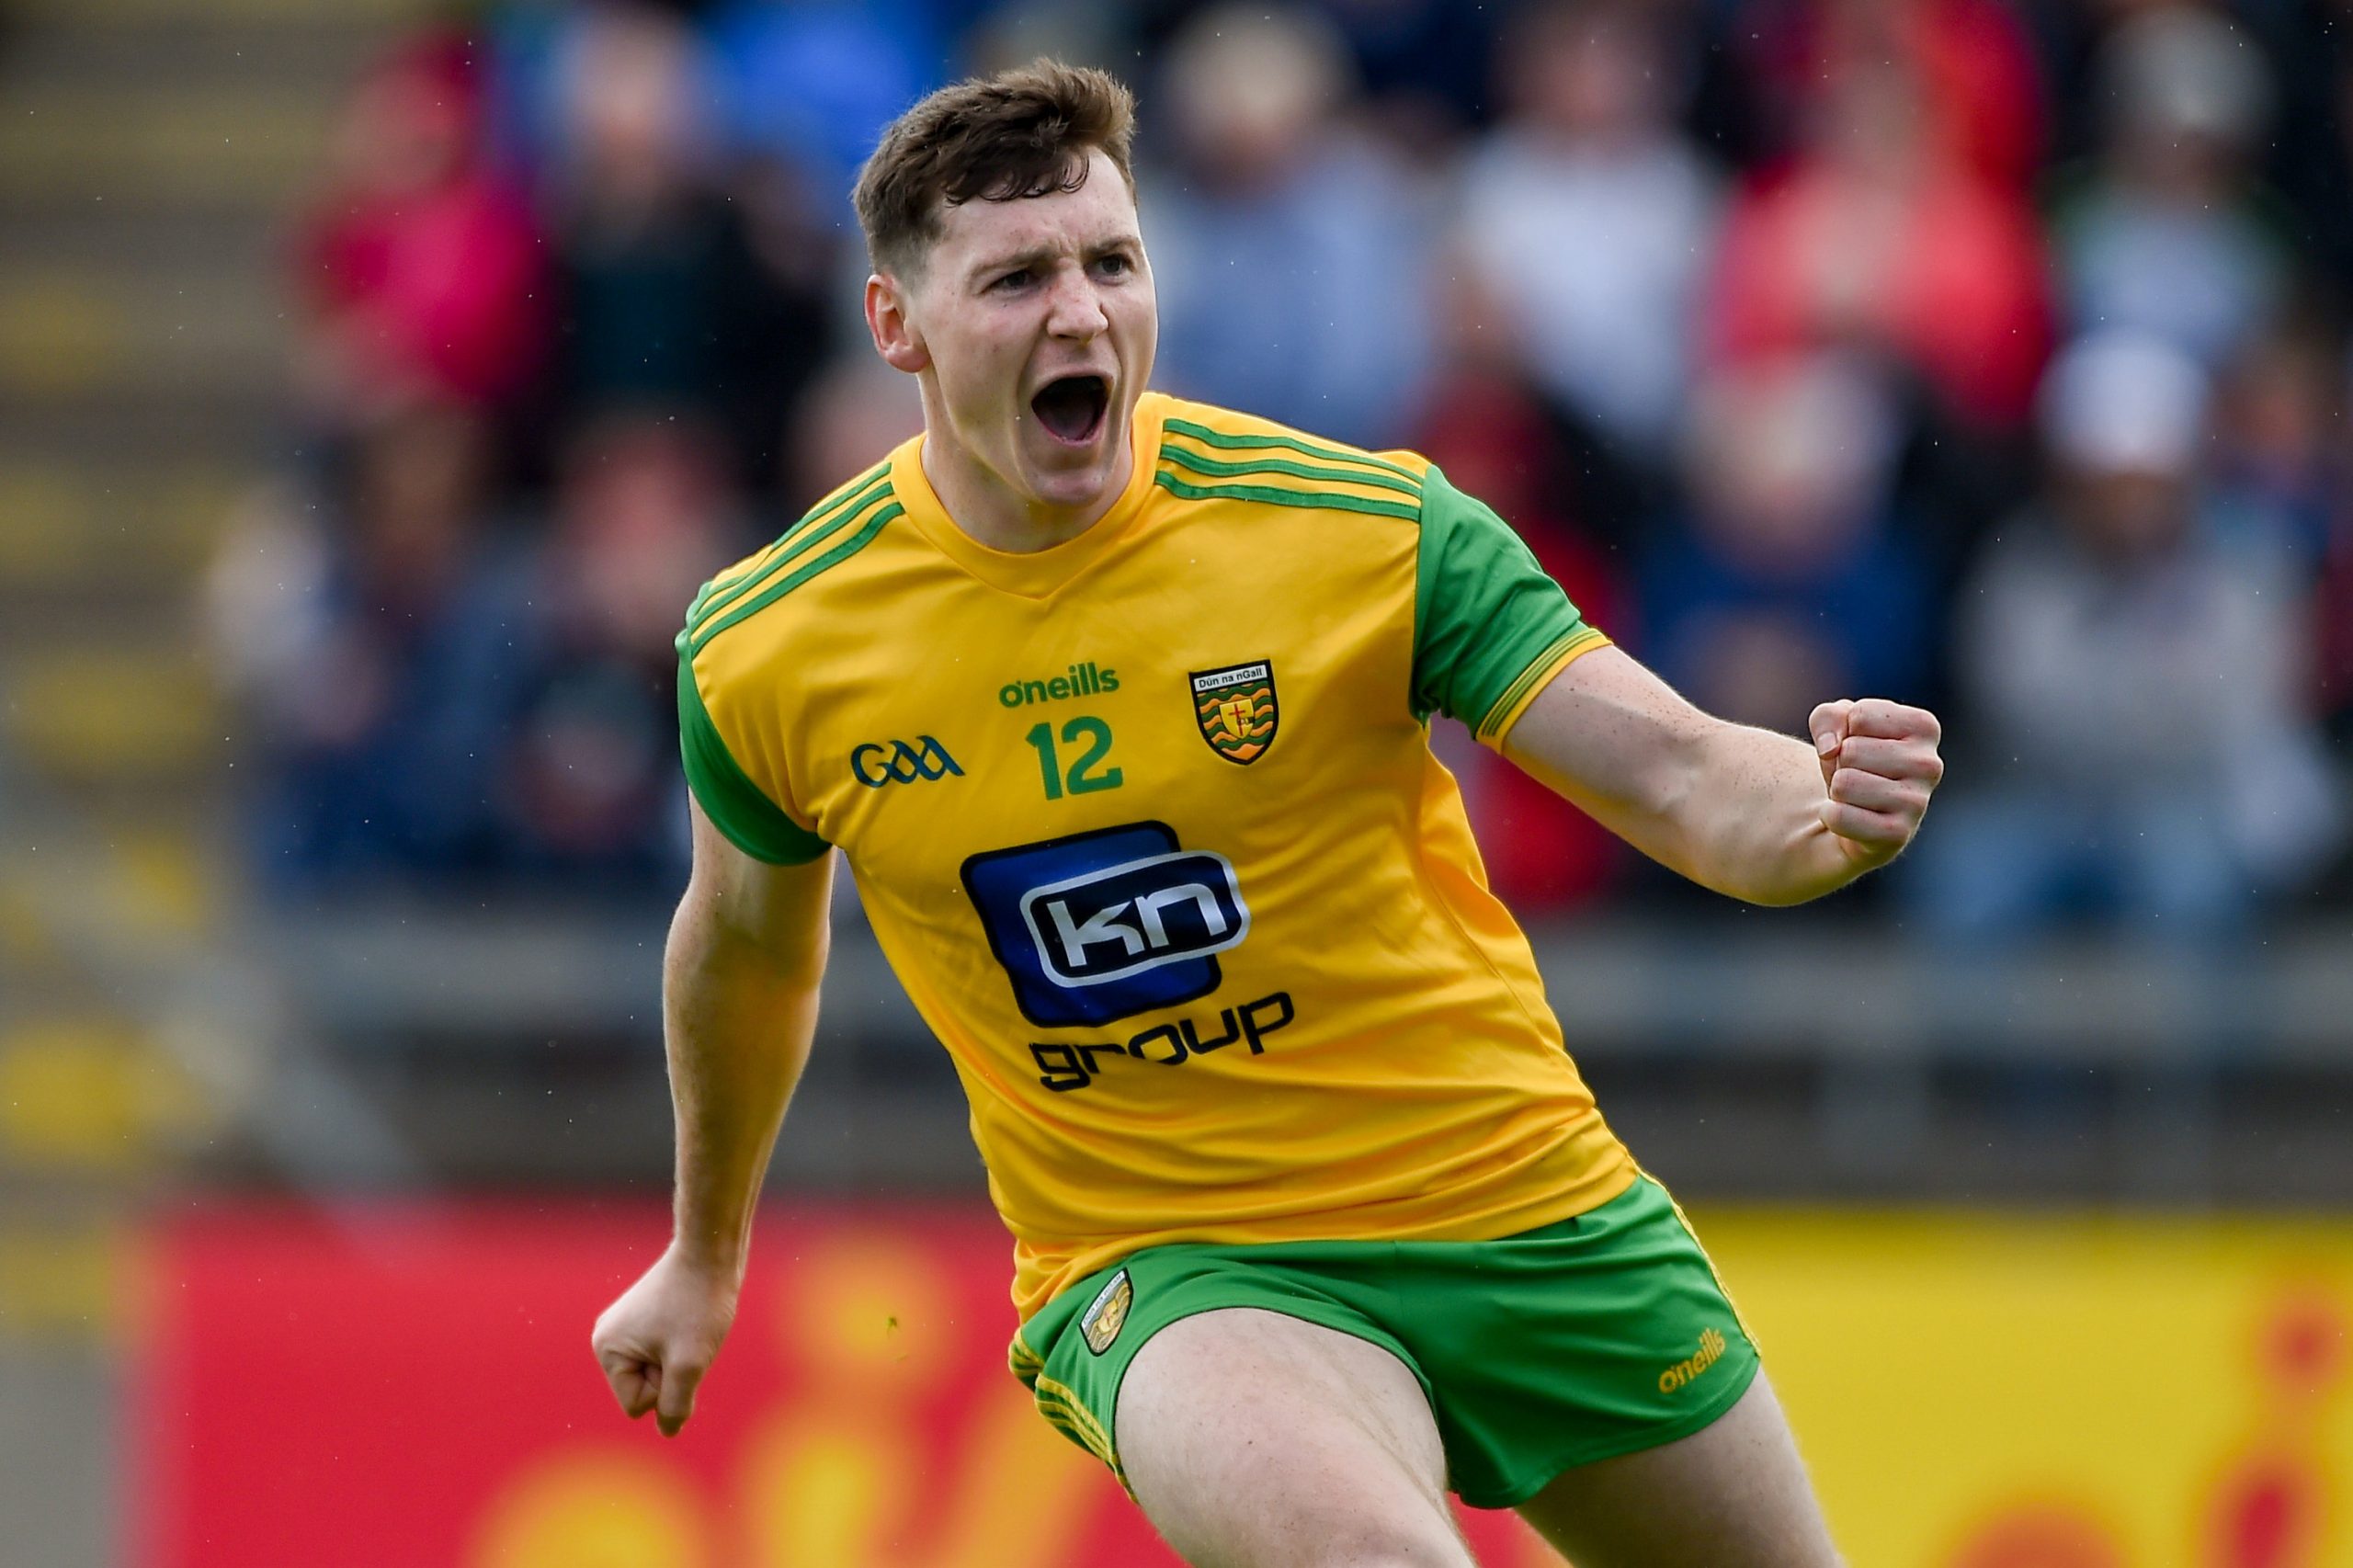 Donegal advance to the Ulster final with victory over Tyrone